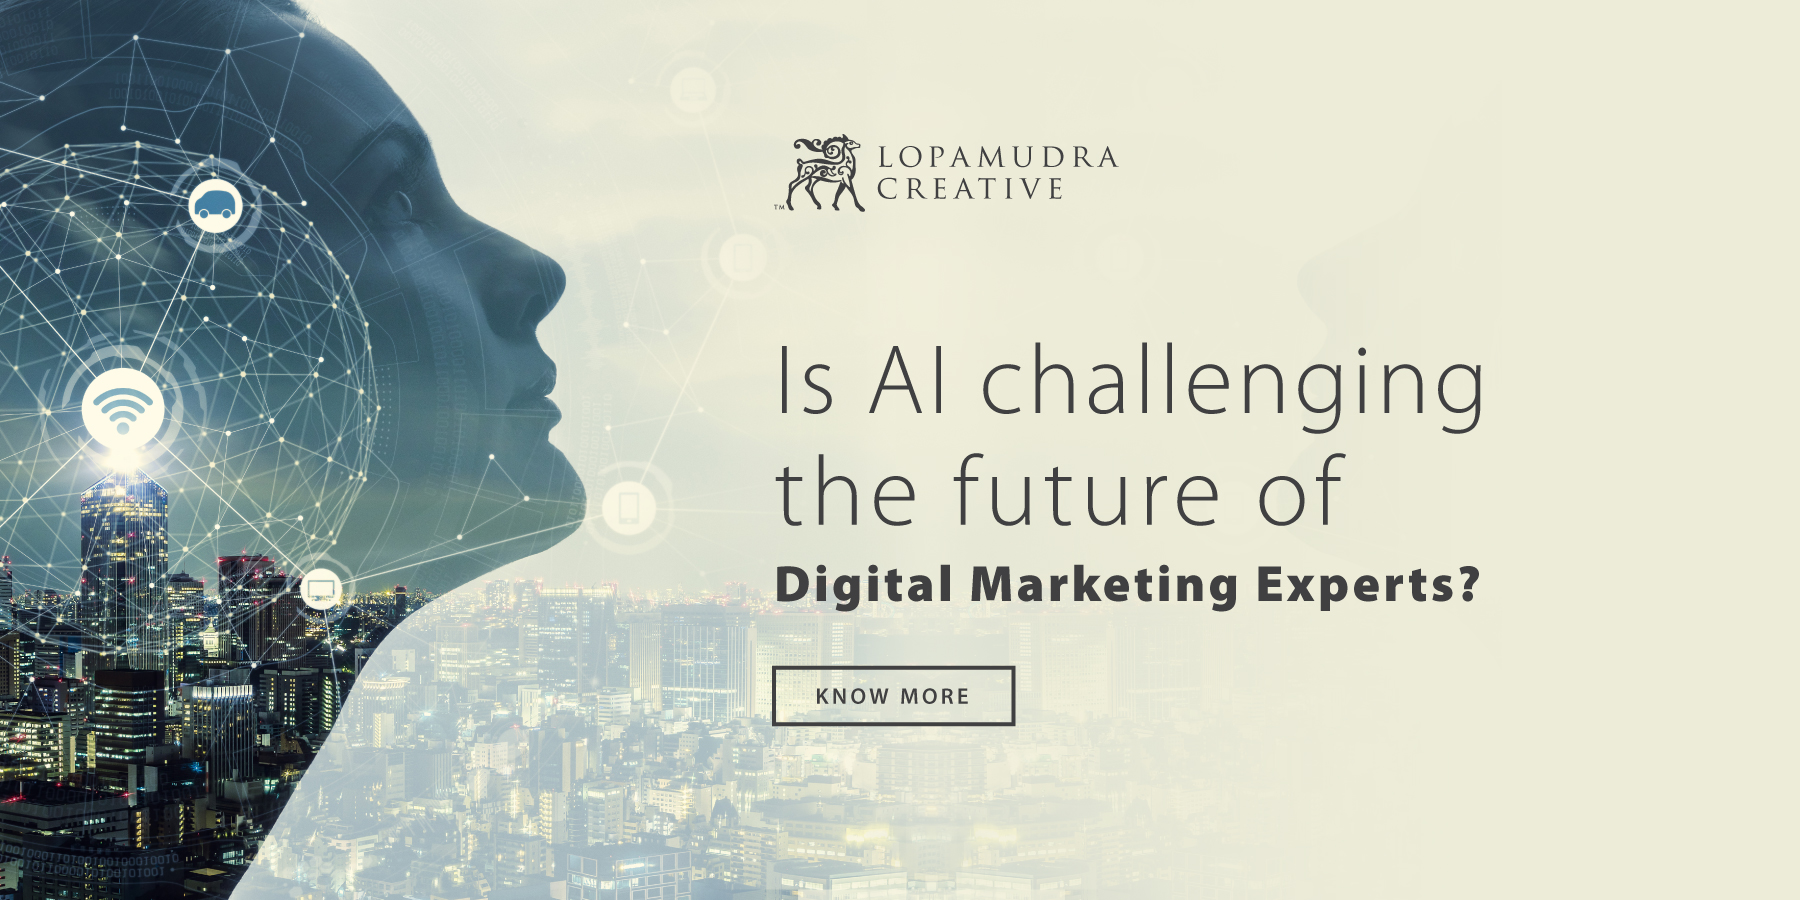 Is AI challenging the future of Digital Marketing Experts?